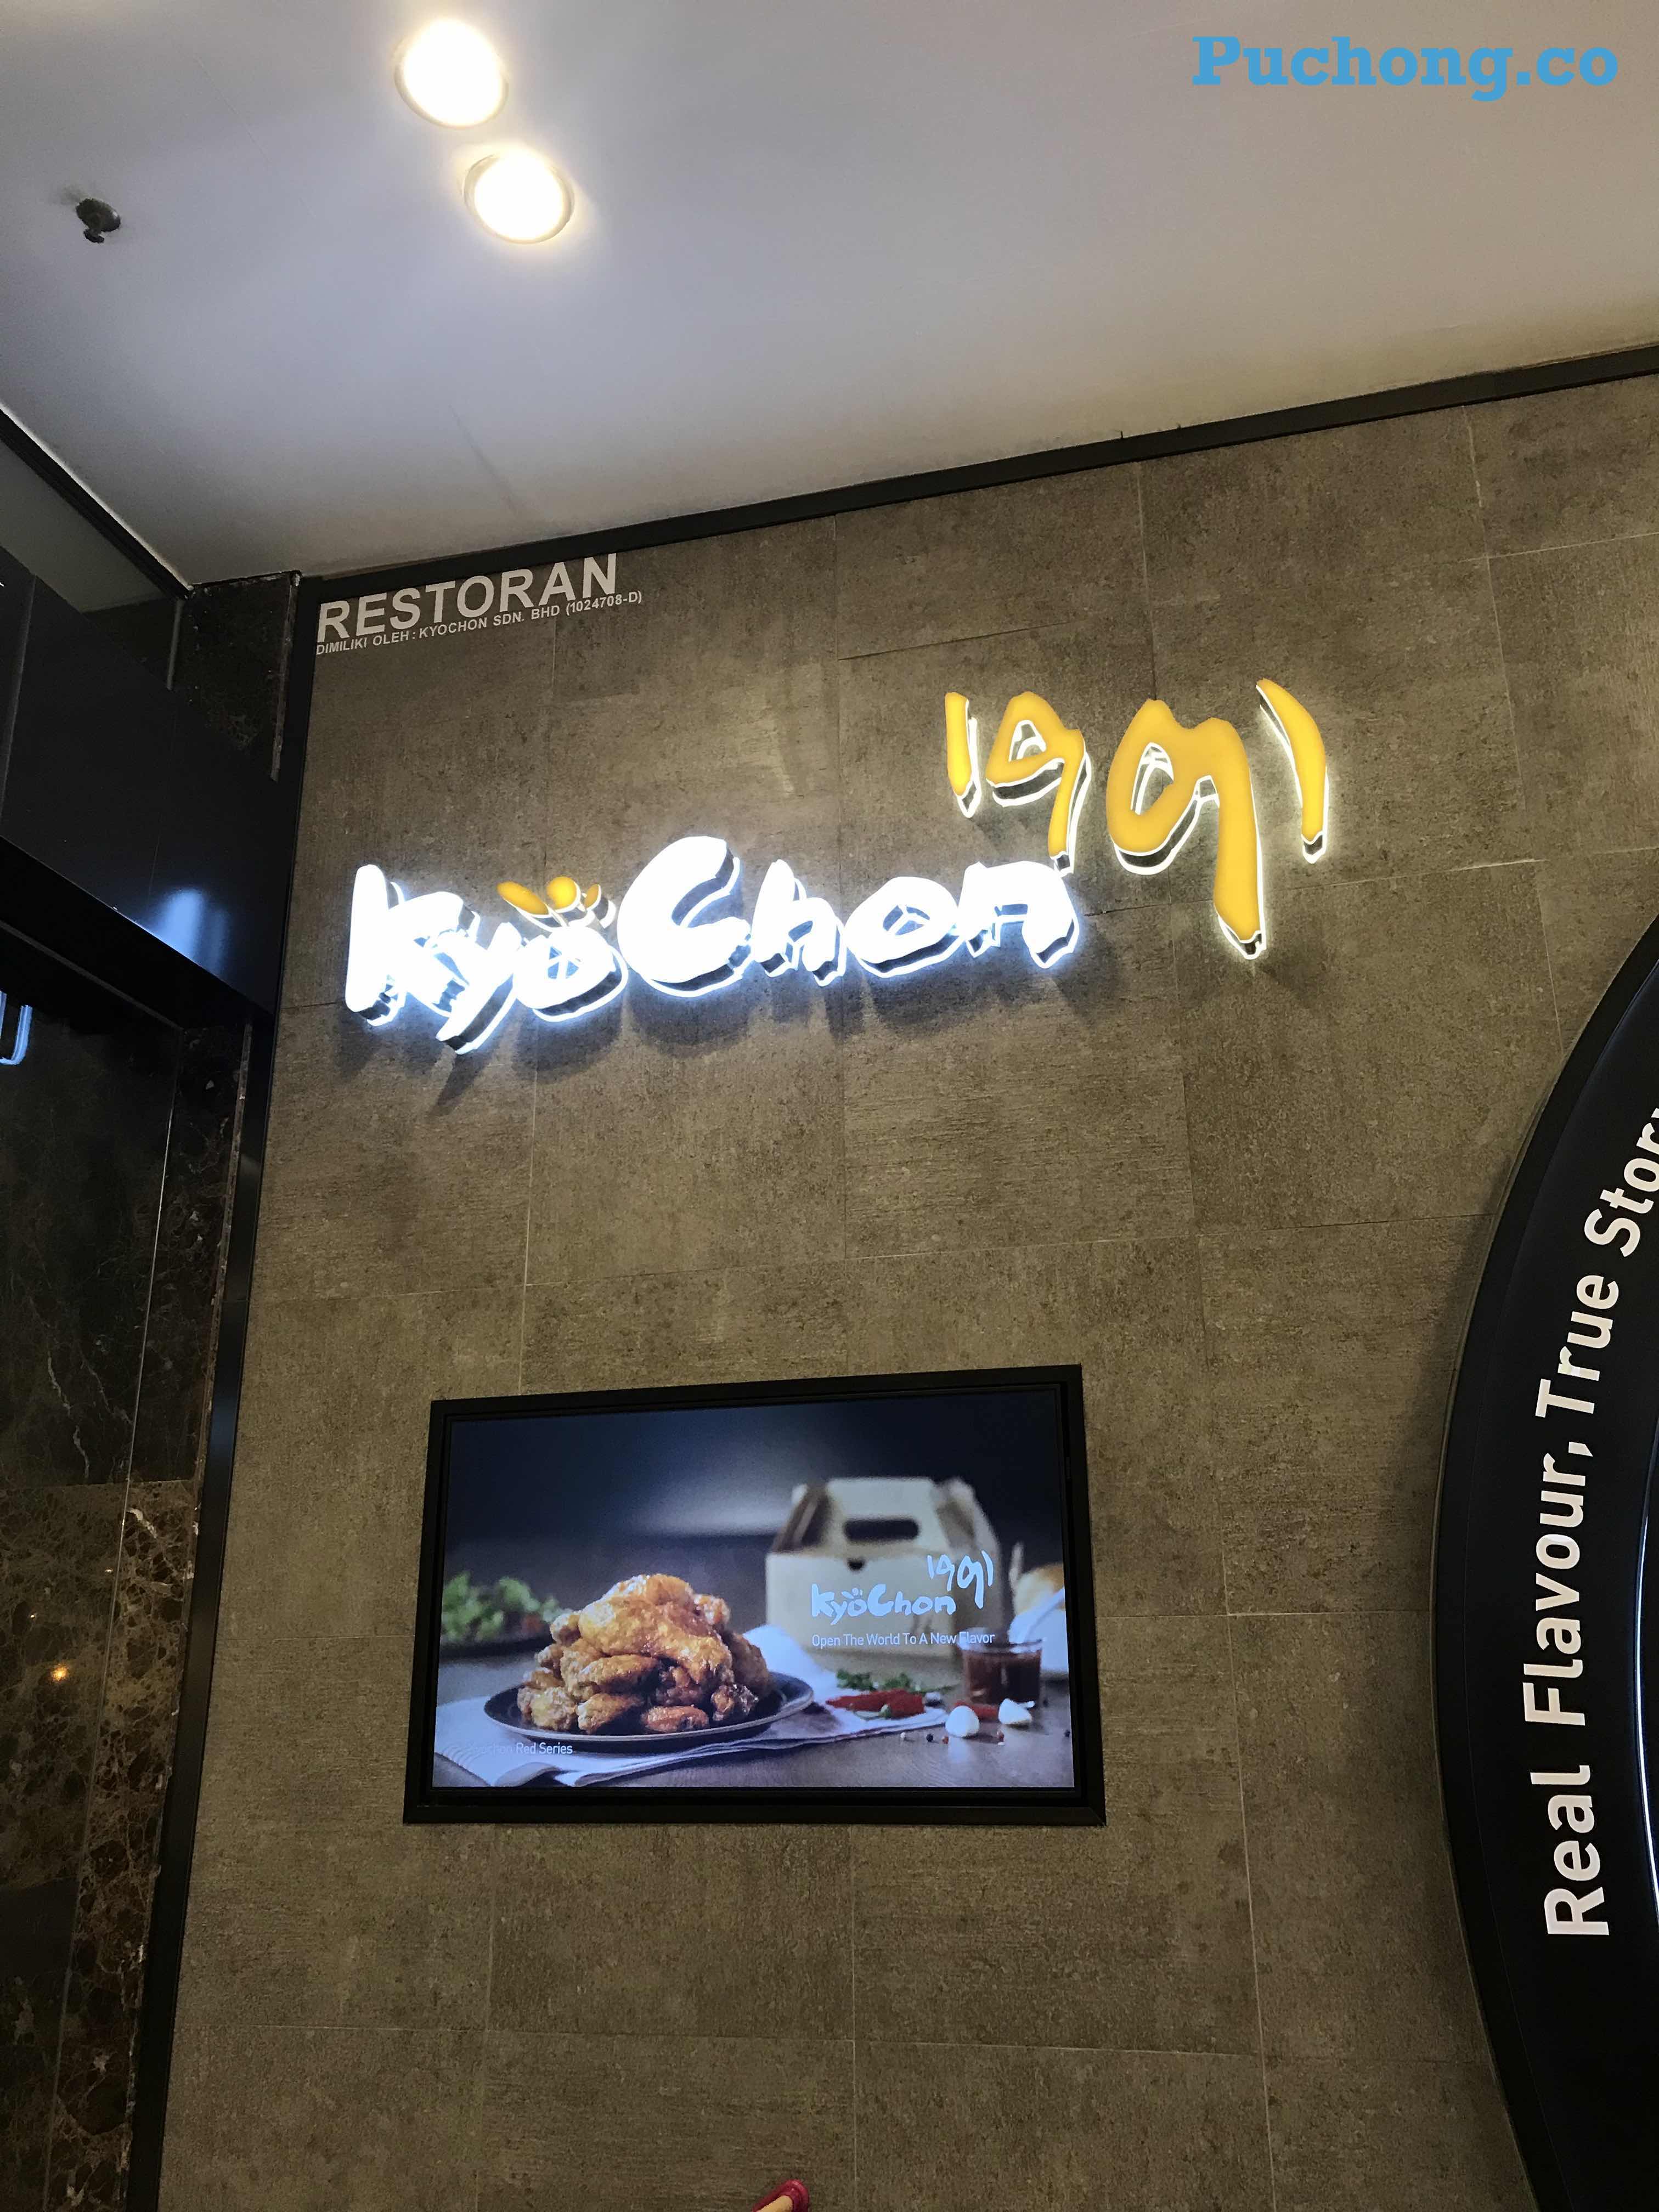 New Food & Beverage Franchise Opened in IOI Mall Puchong April 2019